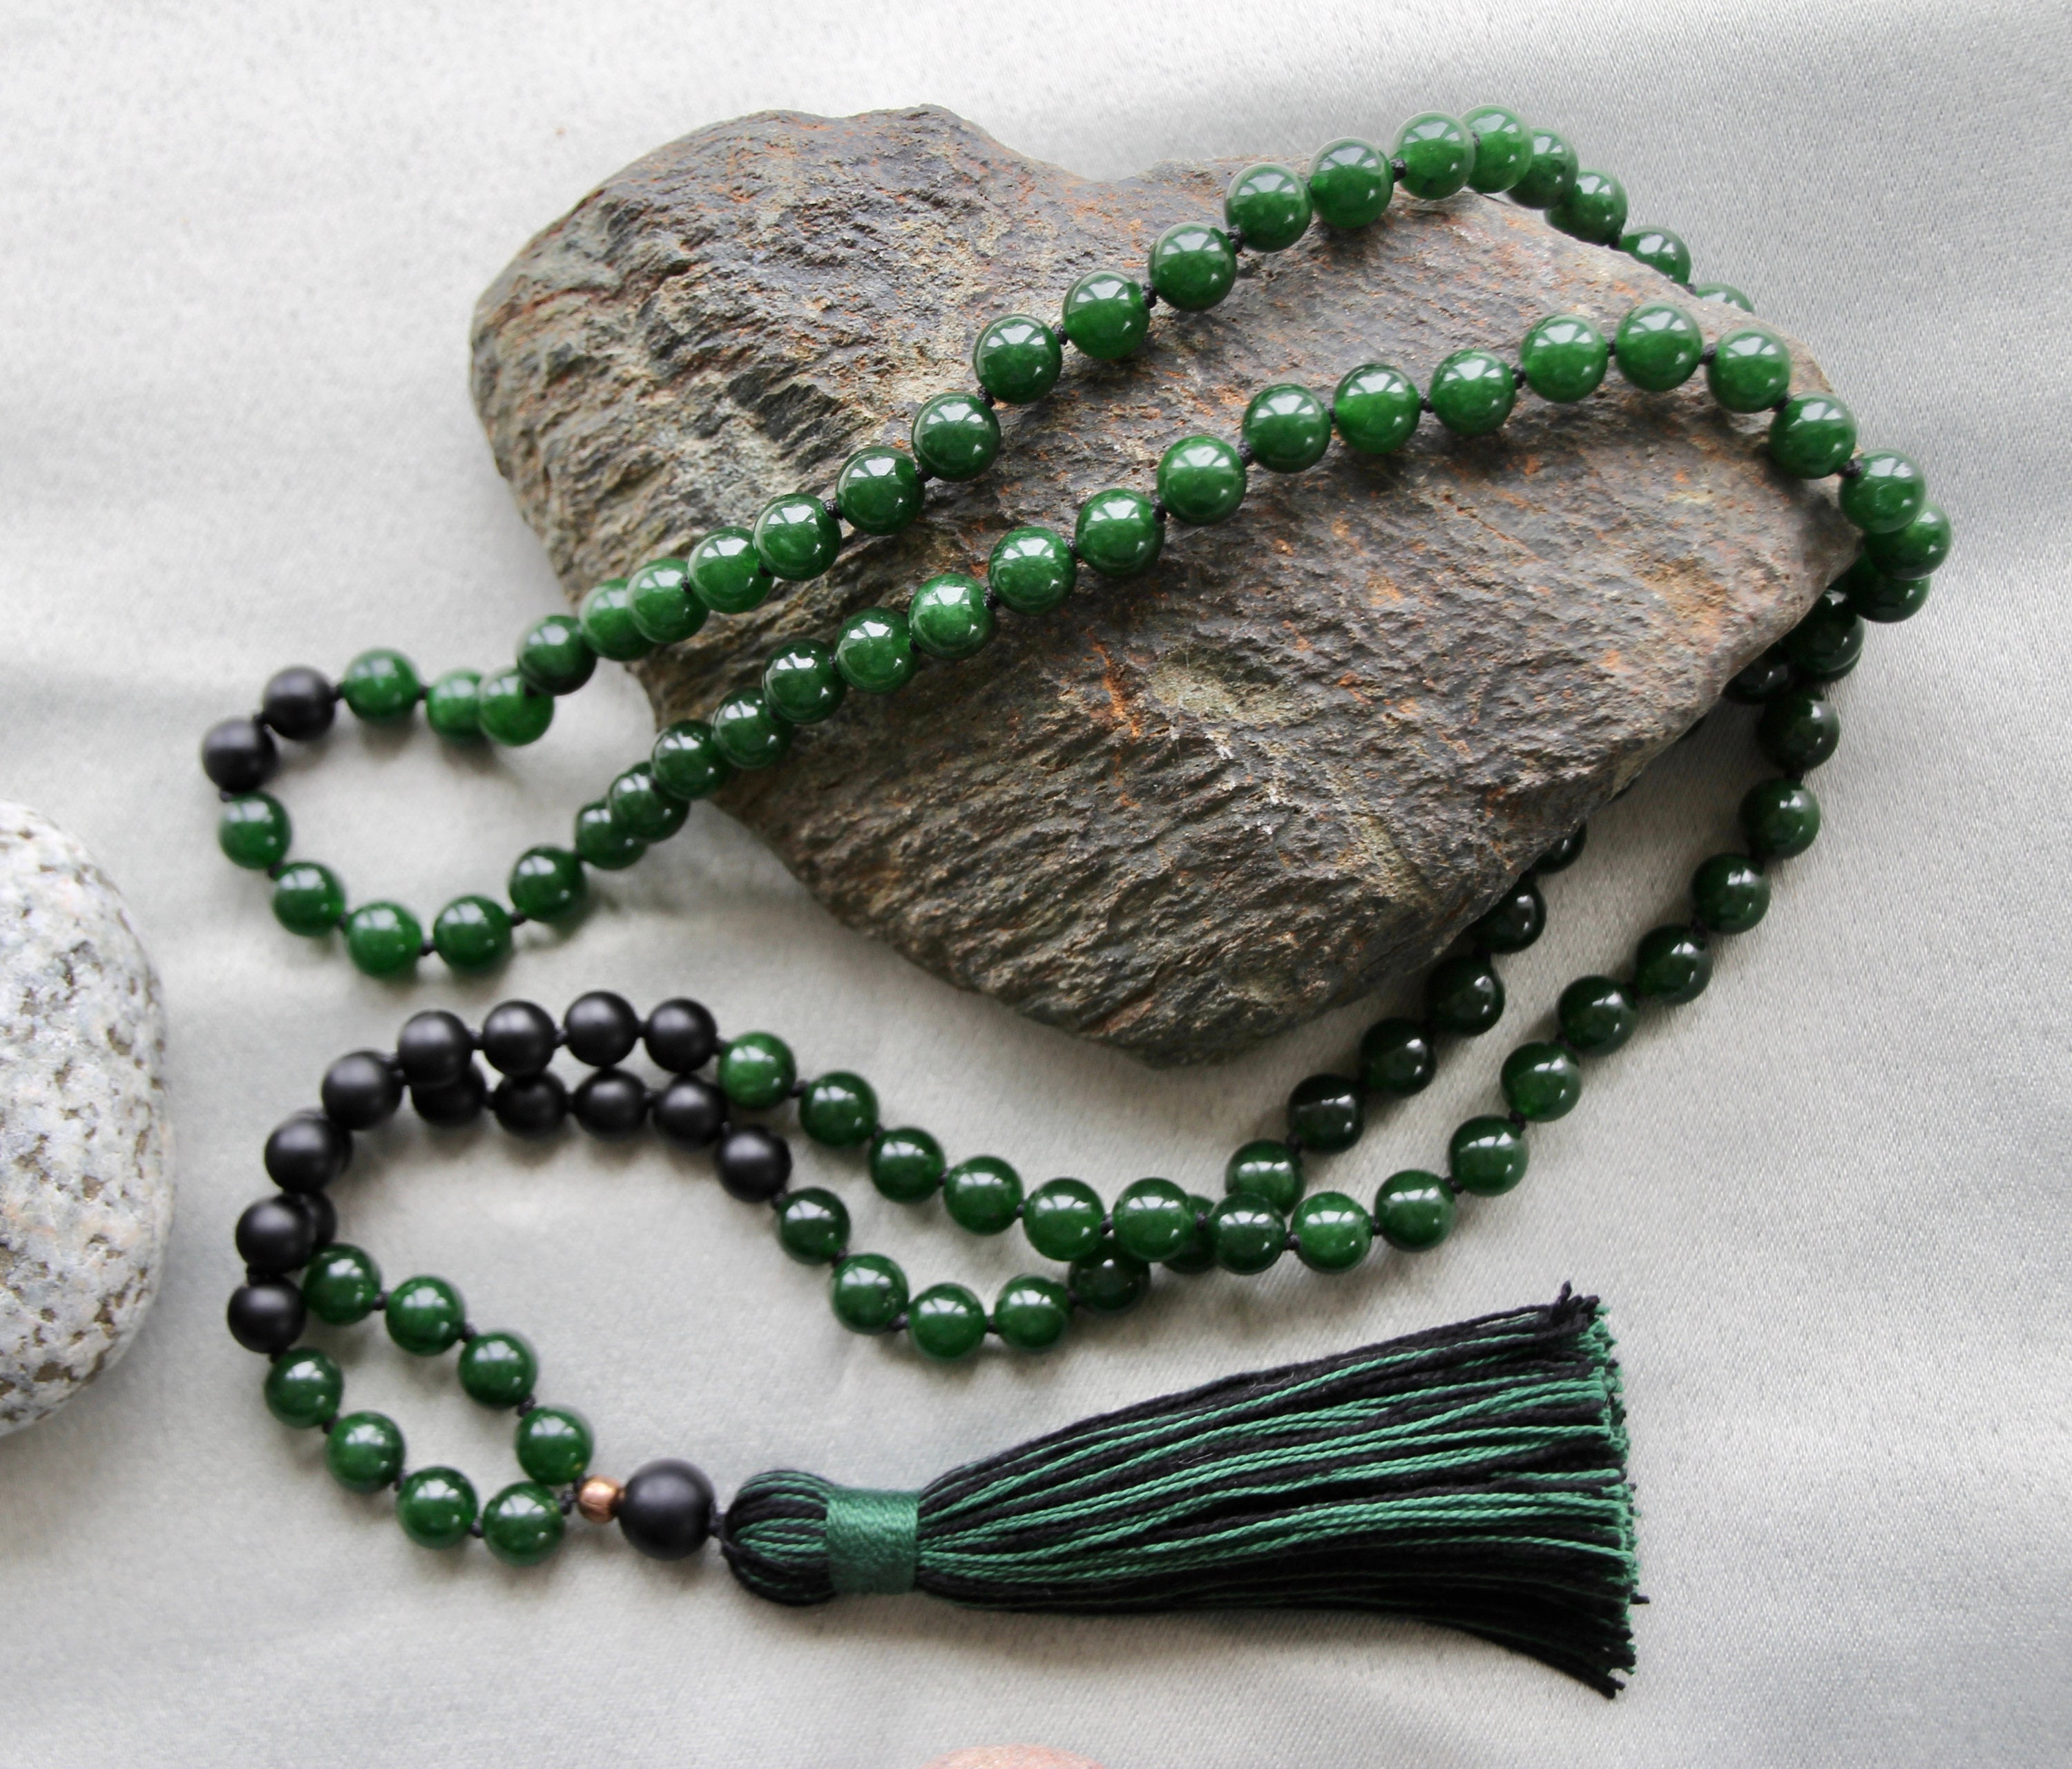 Ocean White Jade with blue & green hand-knotted 108 Mala Necklace